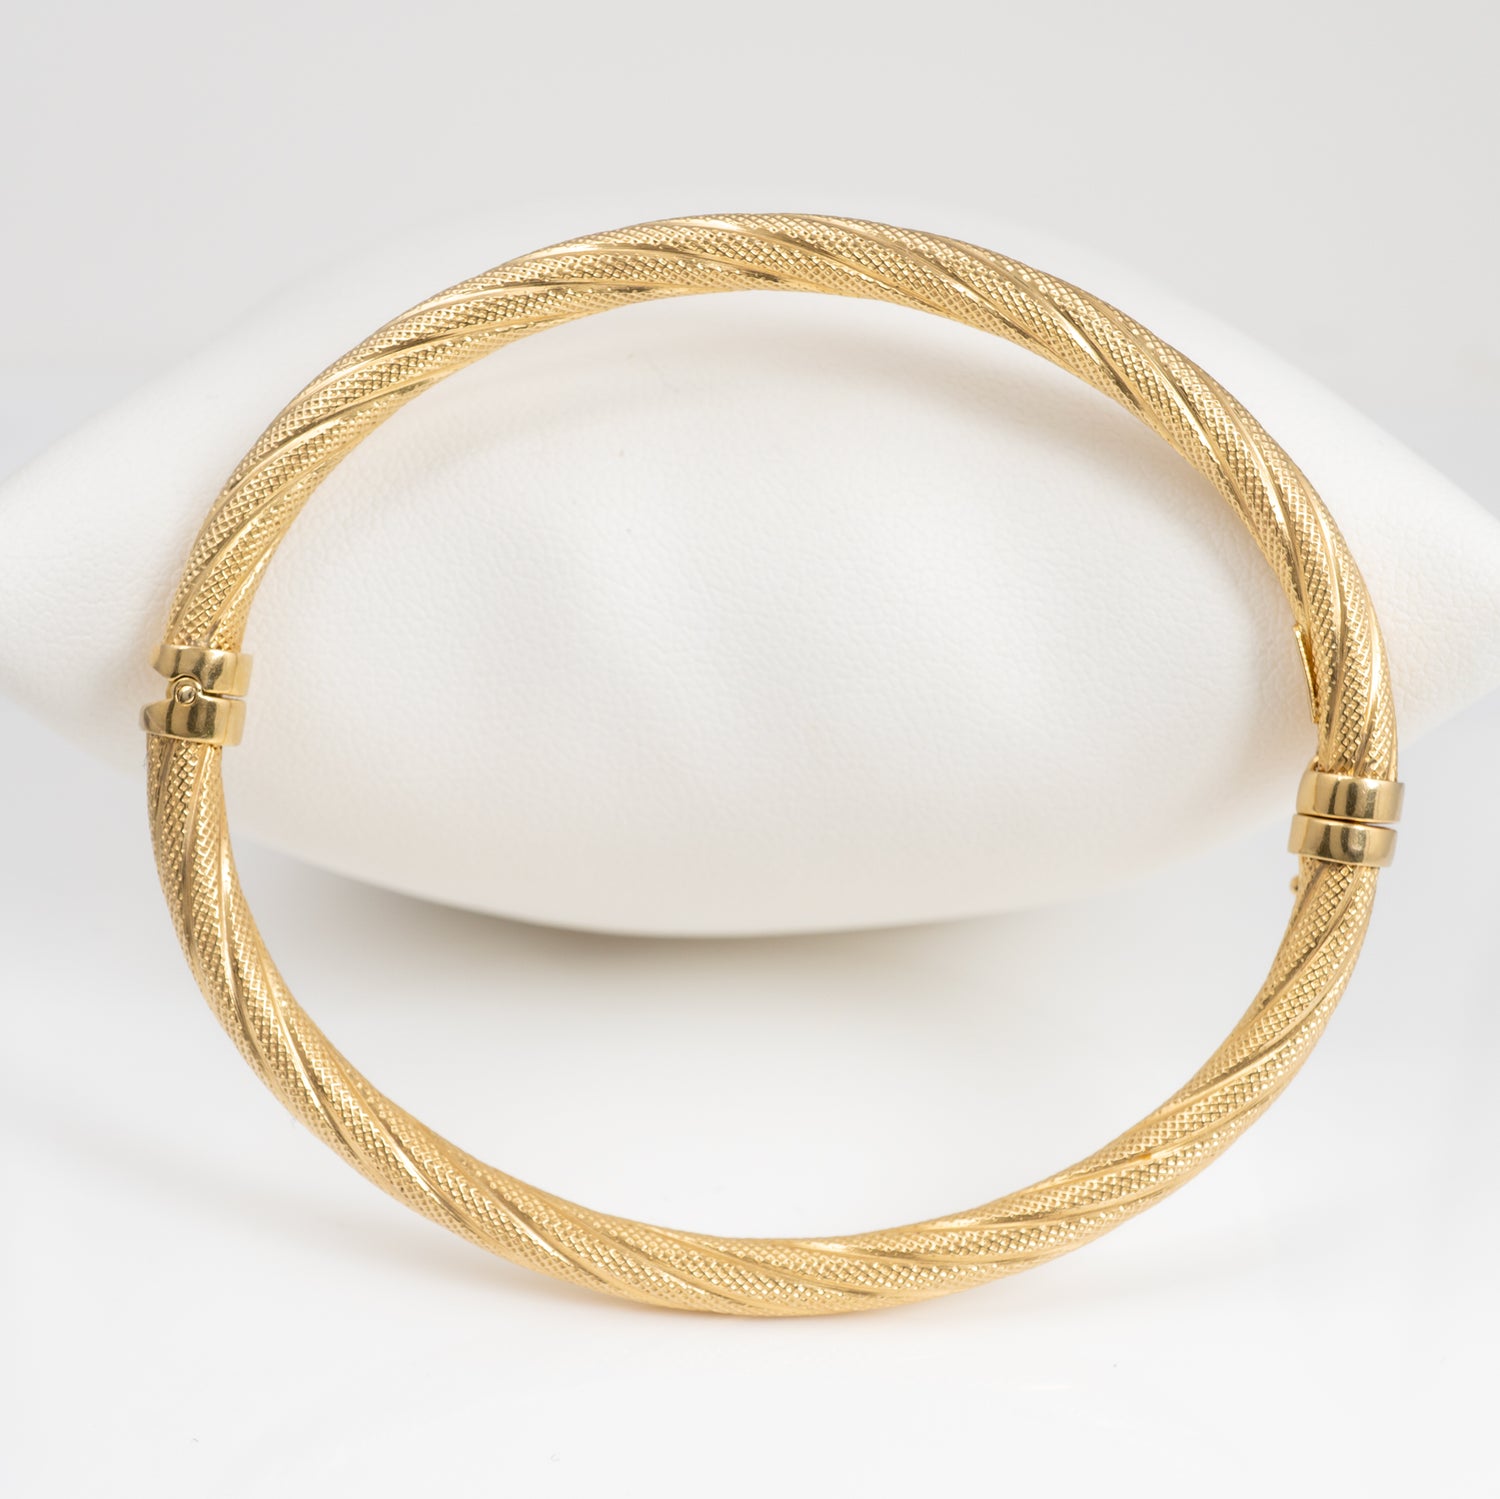 gold bangle bracelet for women with spring clasp lock